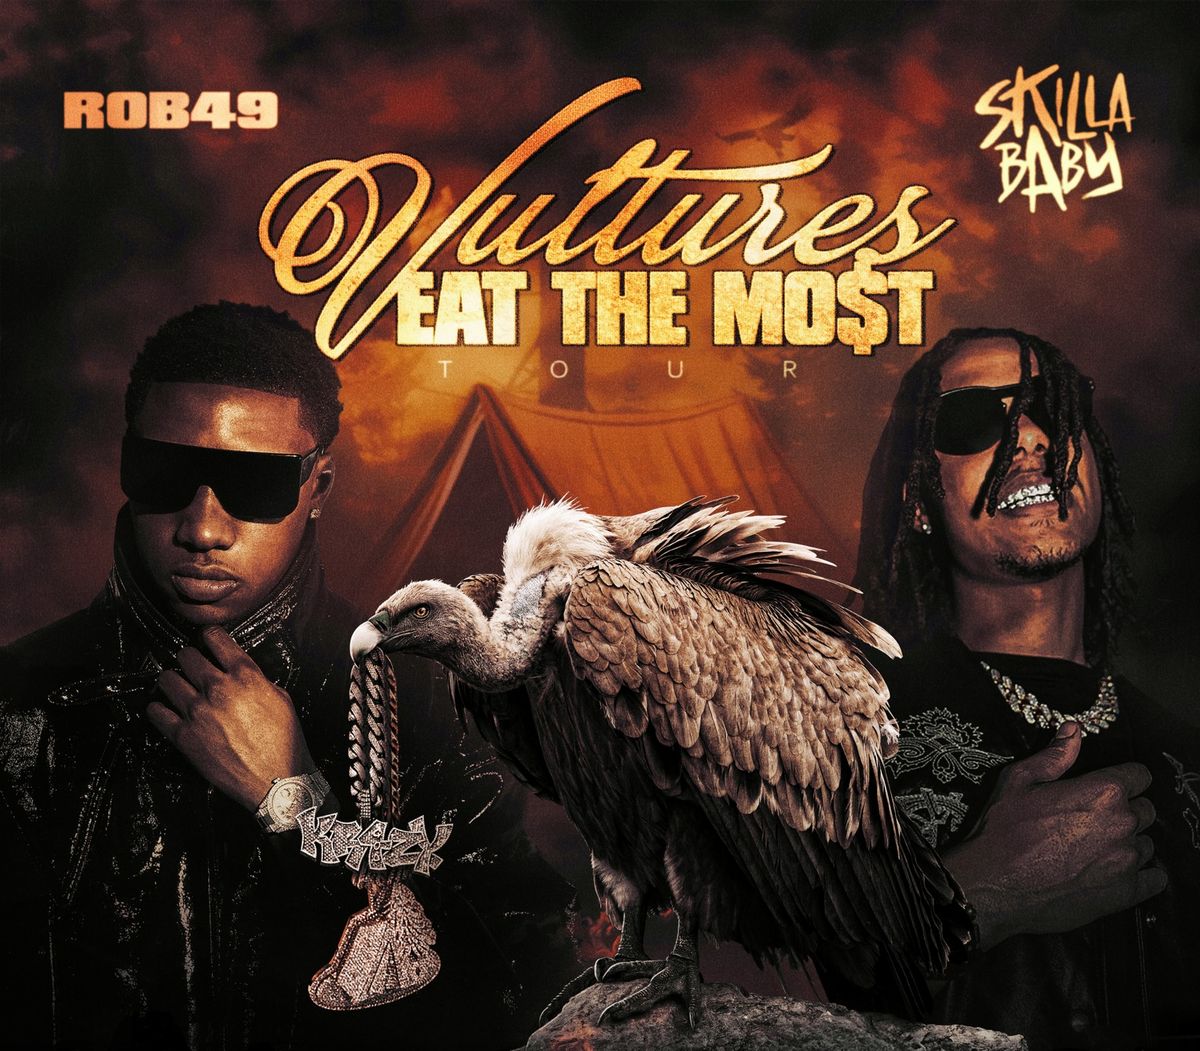 ROB49 & SKILLA BABY \u2013 VULTURES EAT THE MOST TOUR